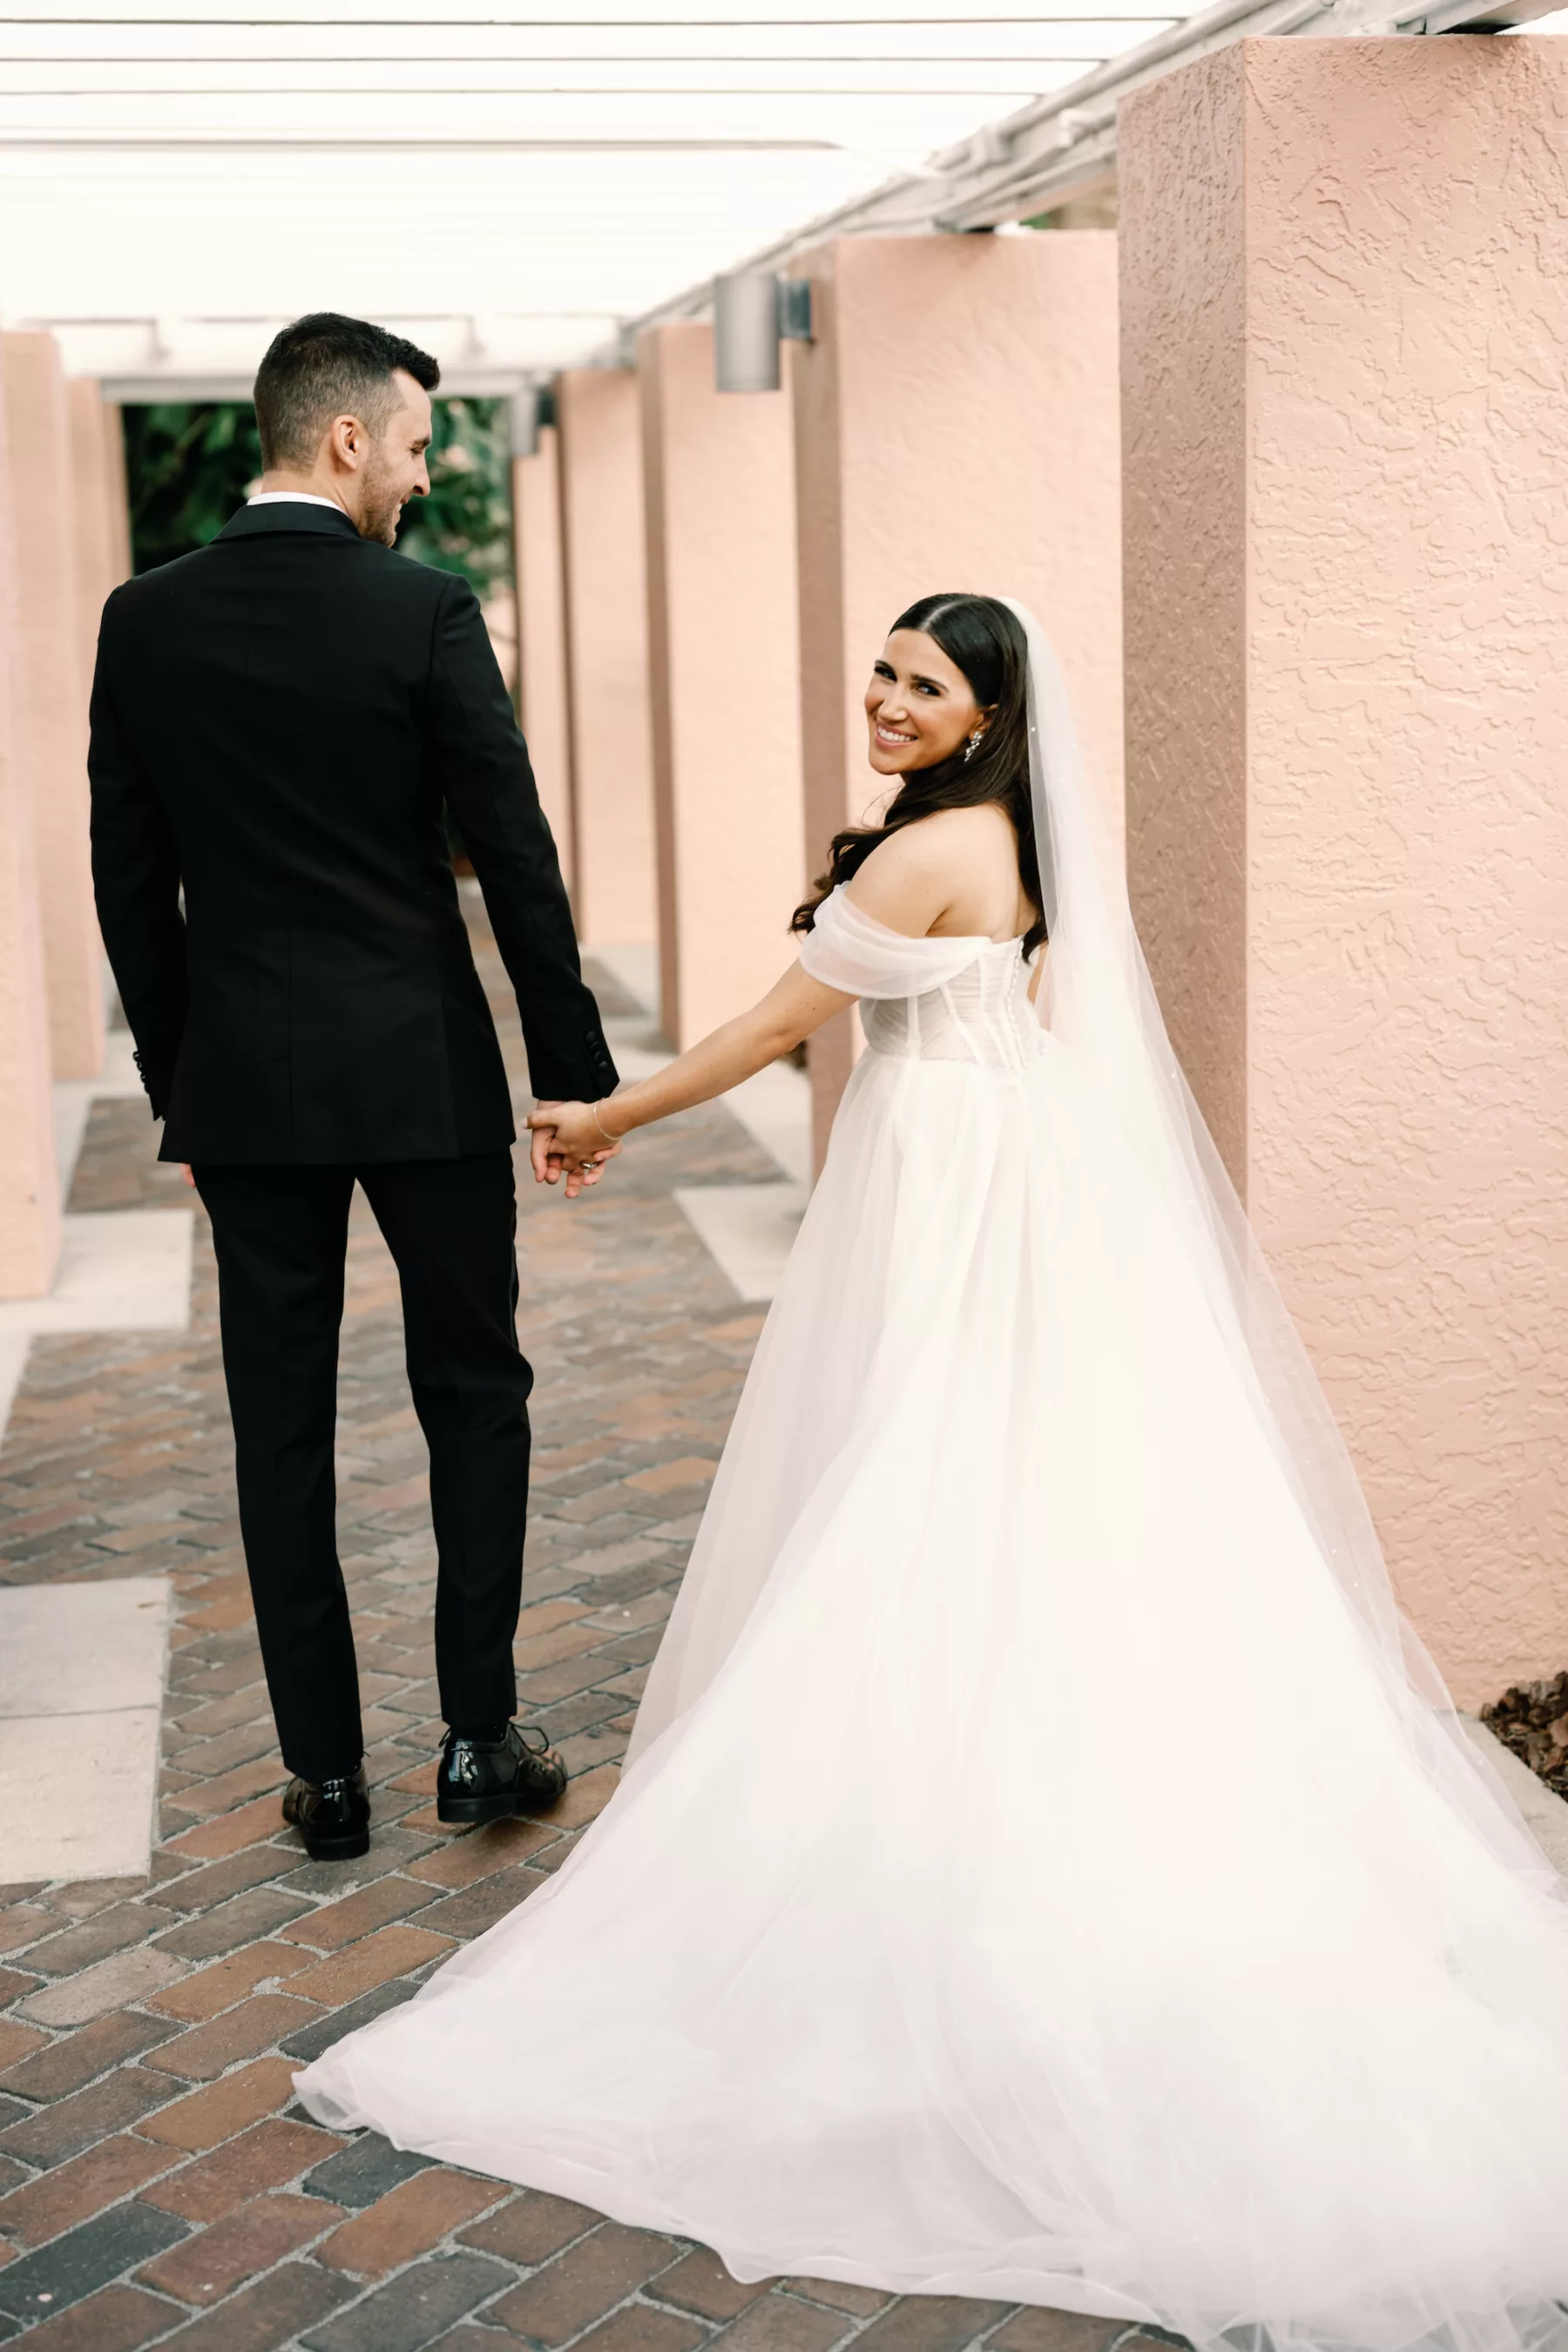 Bride and Groom First Look Wedding Portrait | Ivory Off The Shoulder Boned Bodice Chiffon A Line Martina Liana Wedding Dress Inspiration | Photographer Dewitt for Love Photography